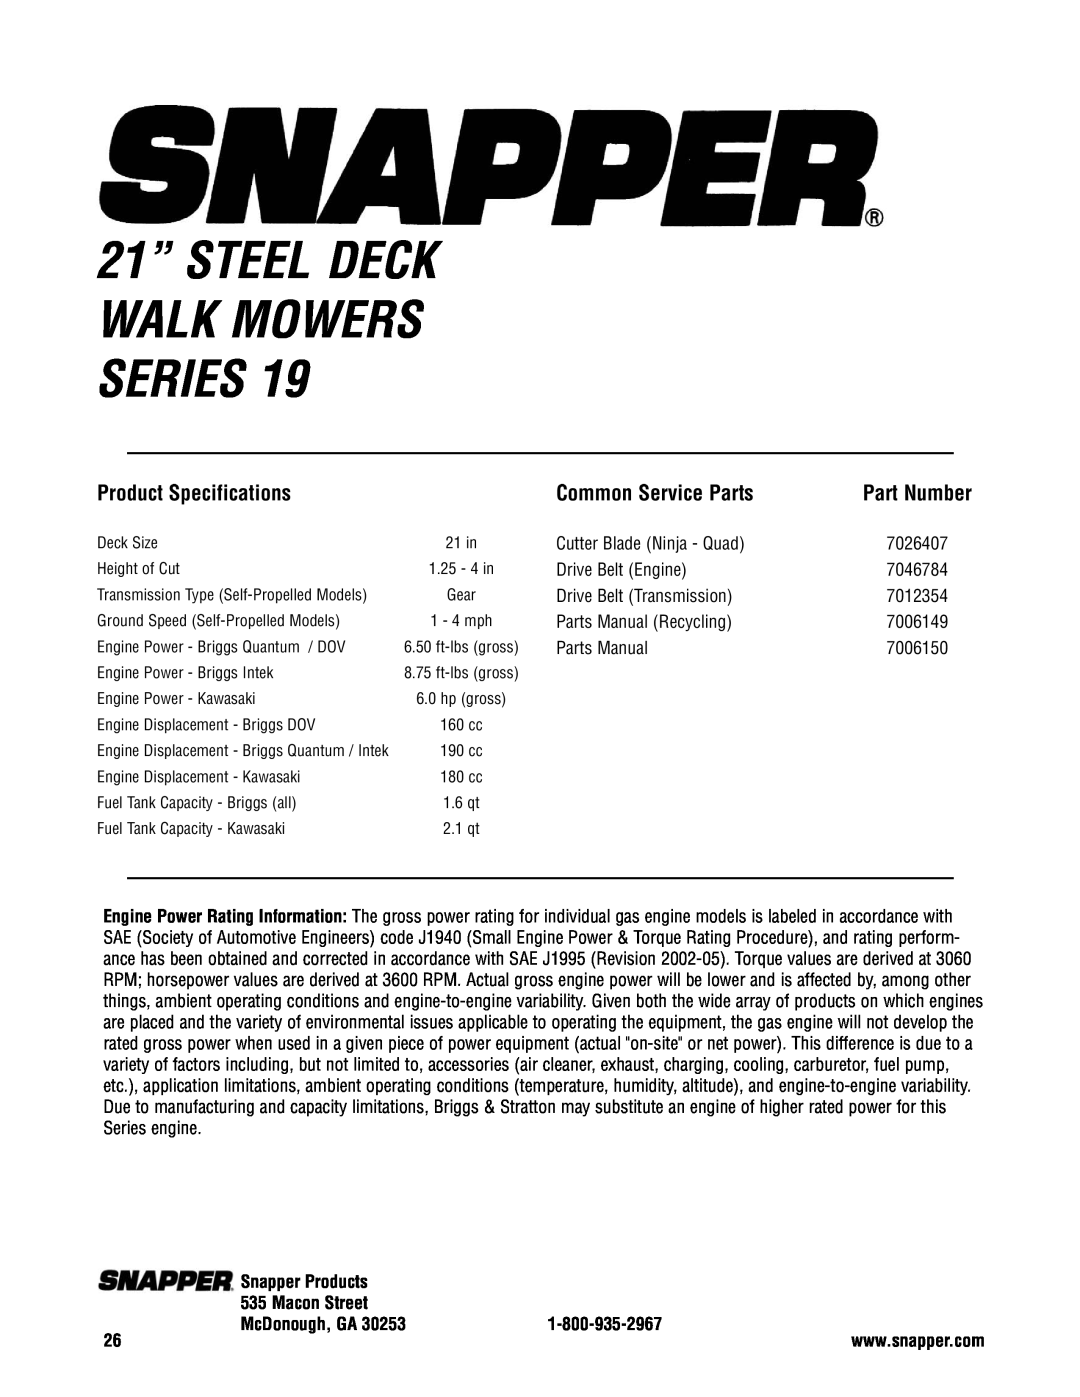 Snapper NP2167519B specifications Product Specifications, Common Service Parts, Part Number, Snapper Products, Macon Street 